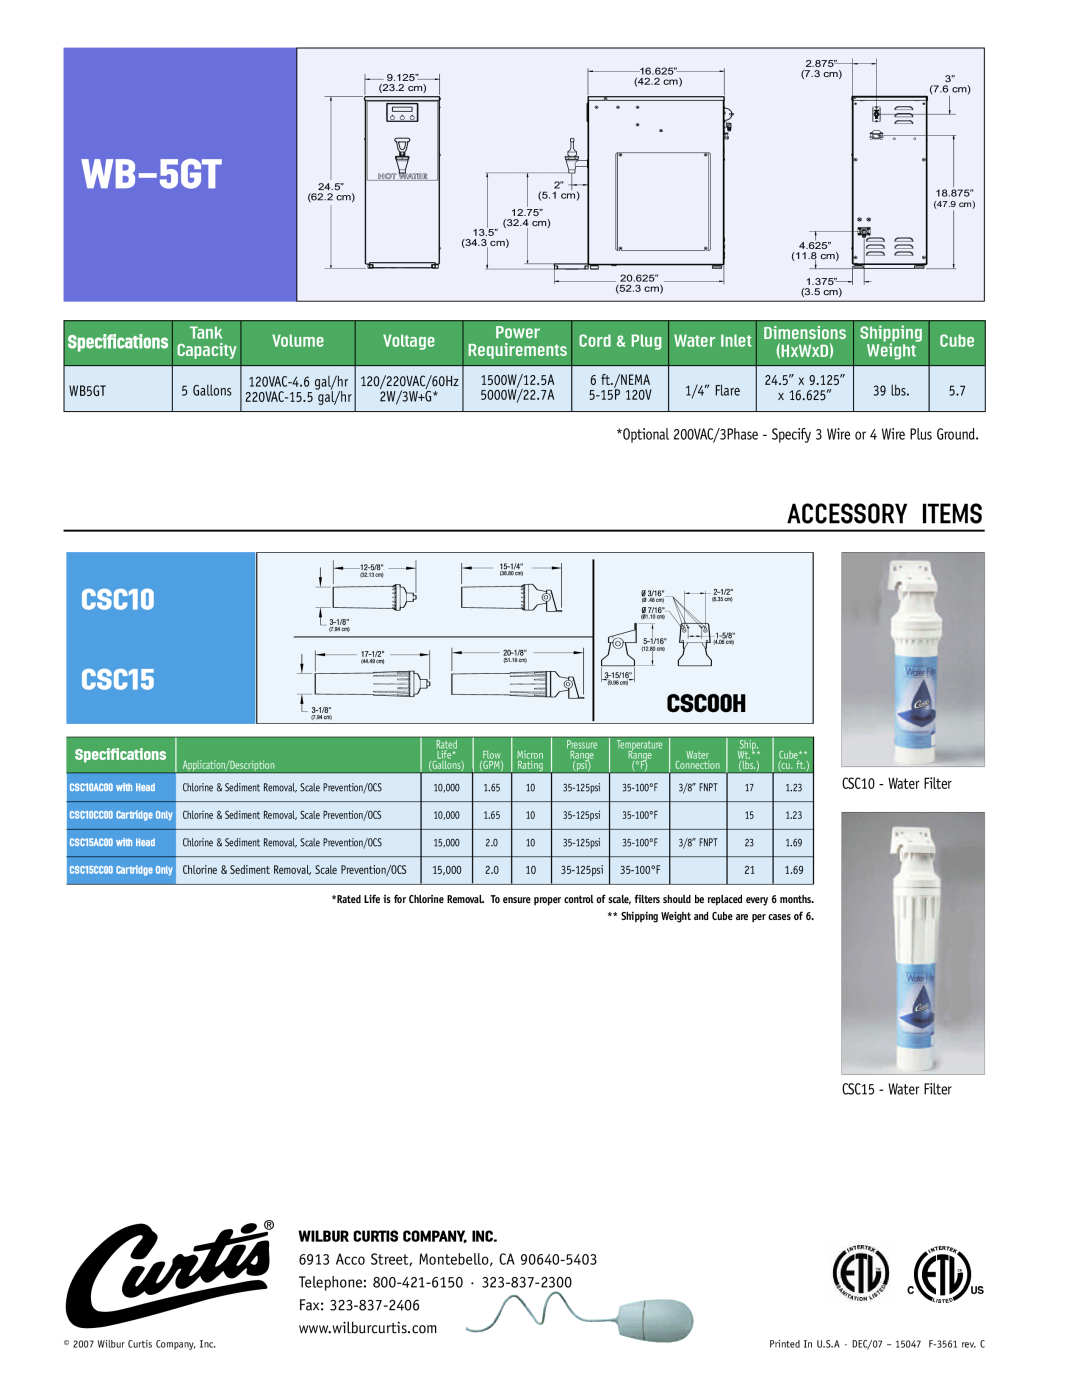 Wibur Curtis Company WB5GT WB-5GT, CSC10 CSC15, Accessory Items, CSC00H, Tank, Volume, Voltage, Power, Dimensions, Cube 